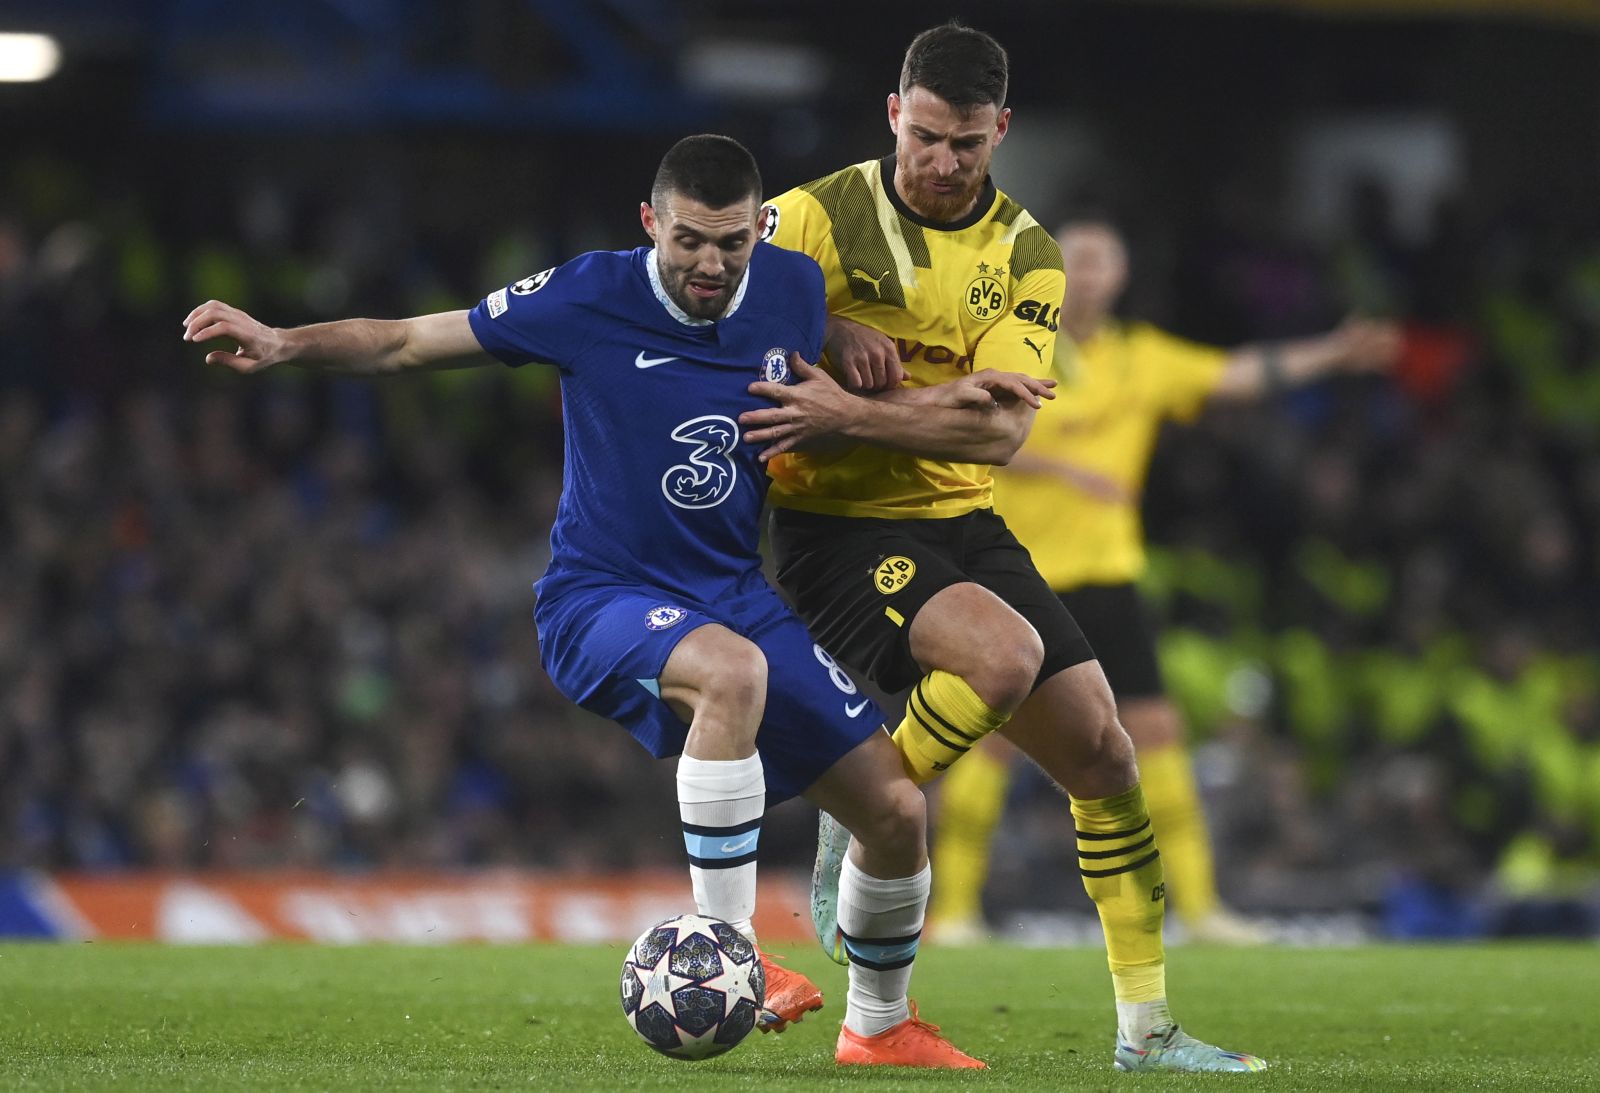 epa10508244 Mateo Kovacic (L) of Chelsea in action against Salih Ozcan (R) of Dortmund during the UEFA Champions League, Round of 16, 2nd leg match between Chelsea FC vs Borussia Dortmund in London, Britain, 07 March 2023.  EPA/Neil Hall